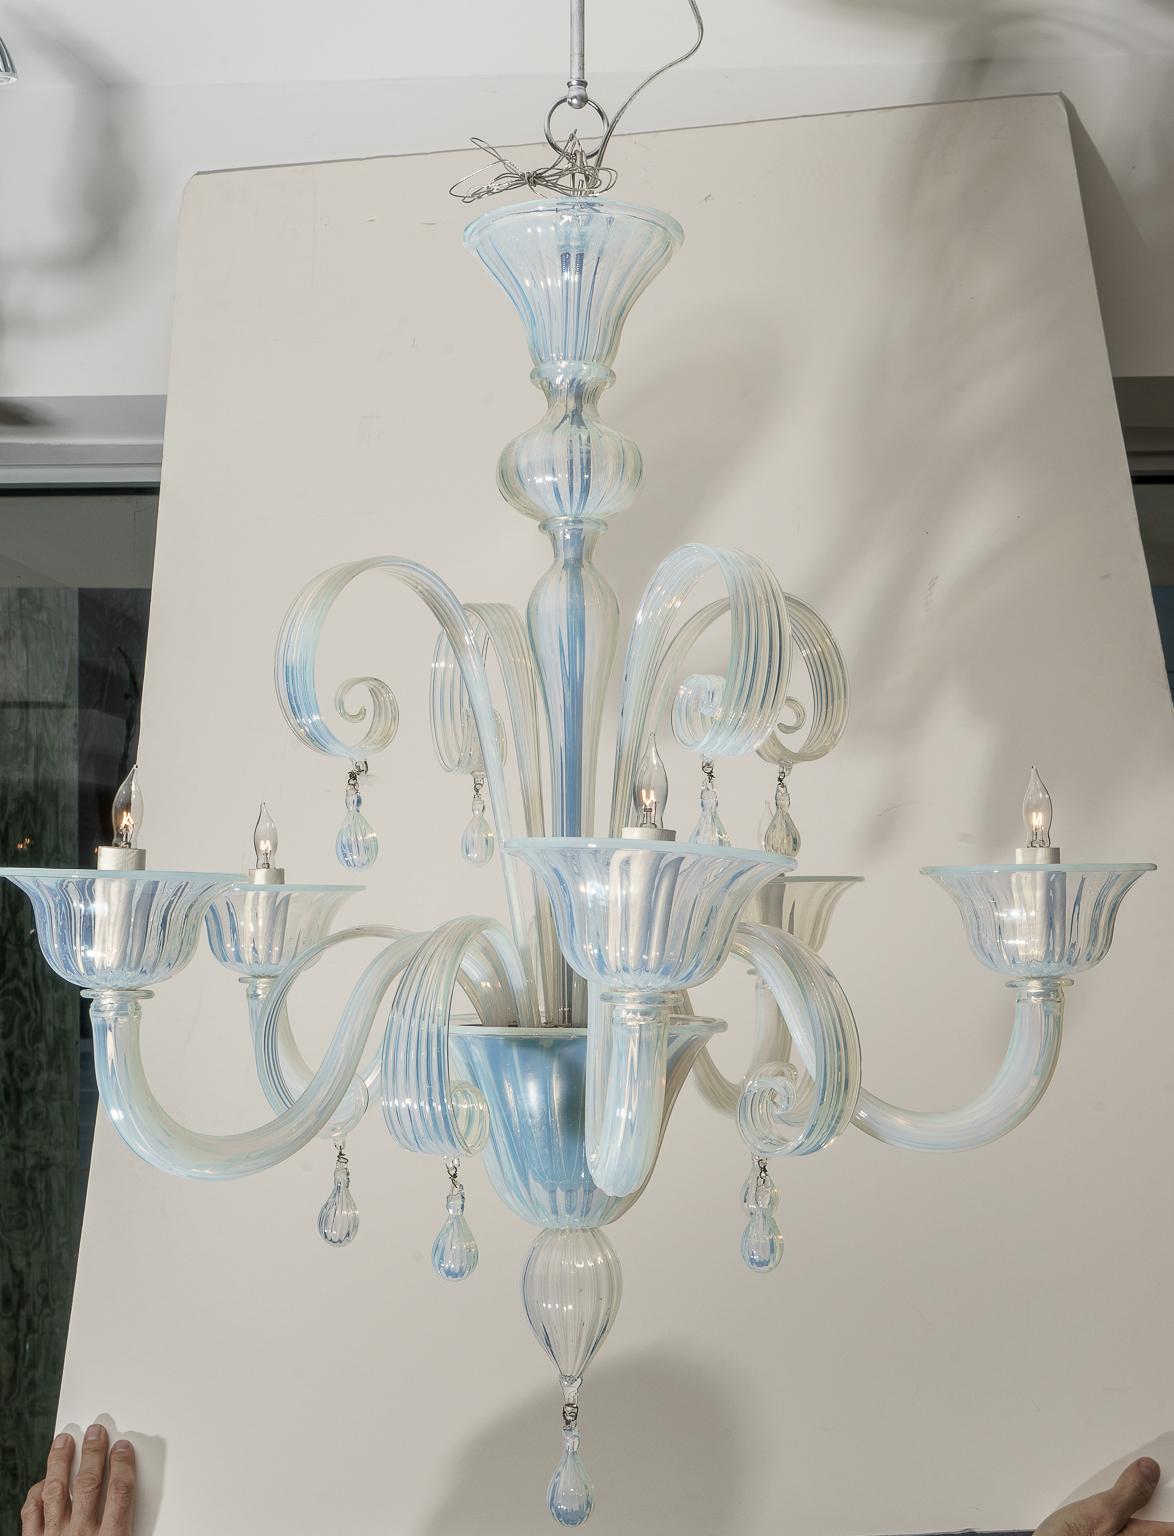 This romantic and stylish opaline glass Murano chandelier was acquired from a Palm Beach estate and it dates to the later part of the 20th century.

Note: Dimensions of the body of the chandelier are 31.25